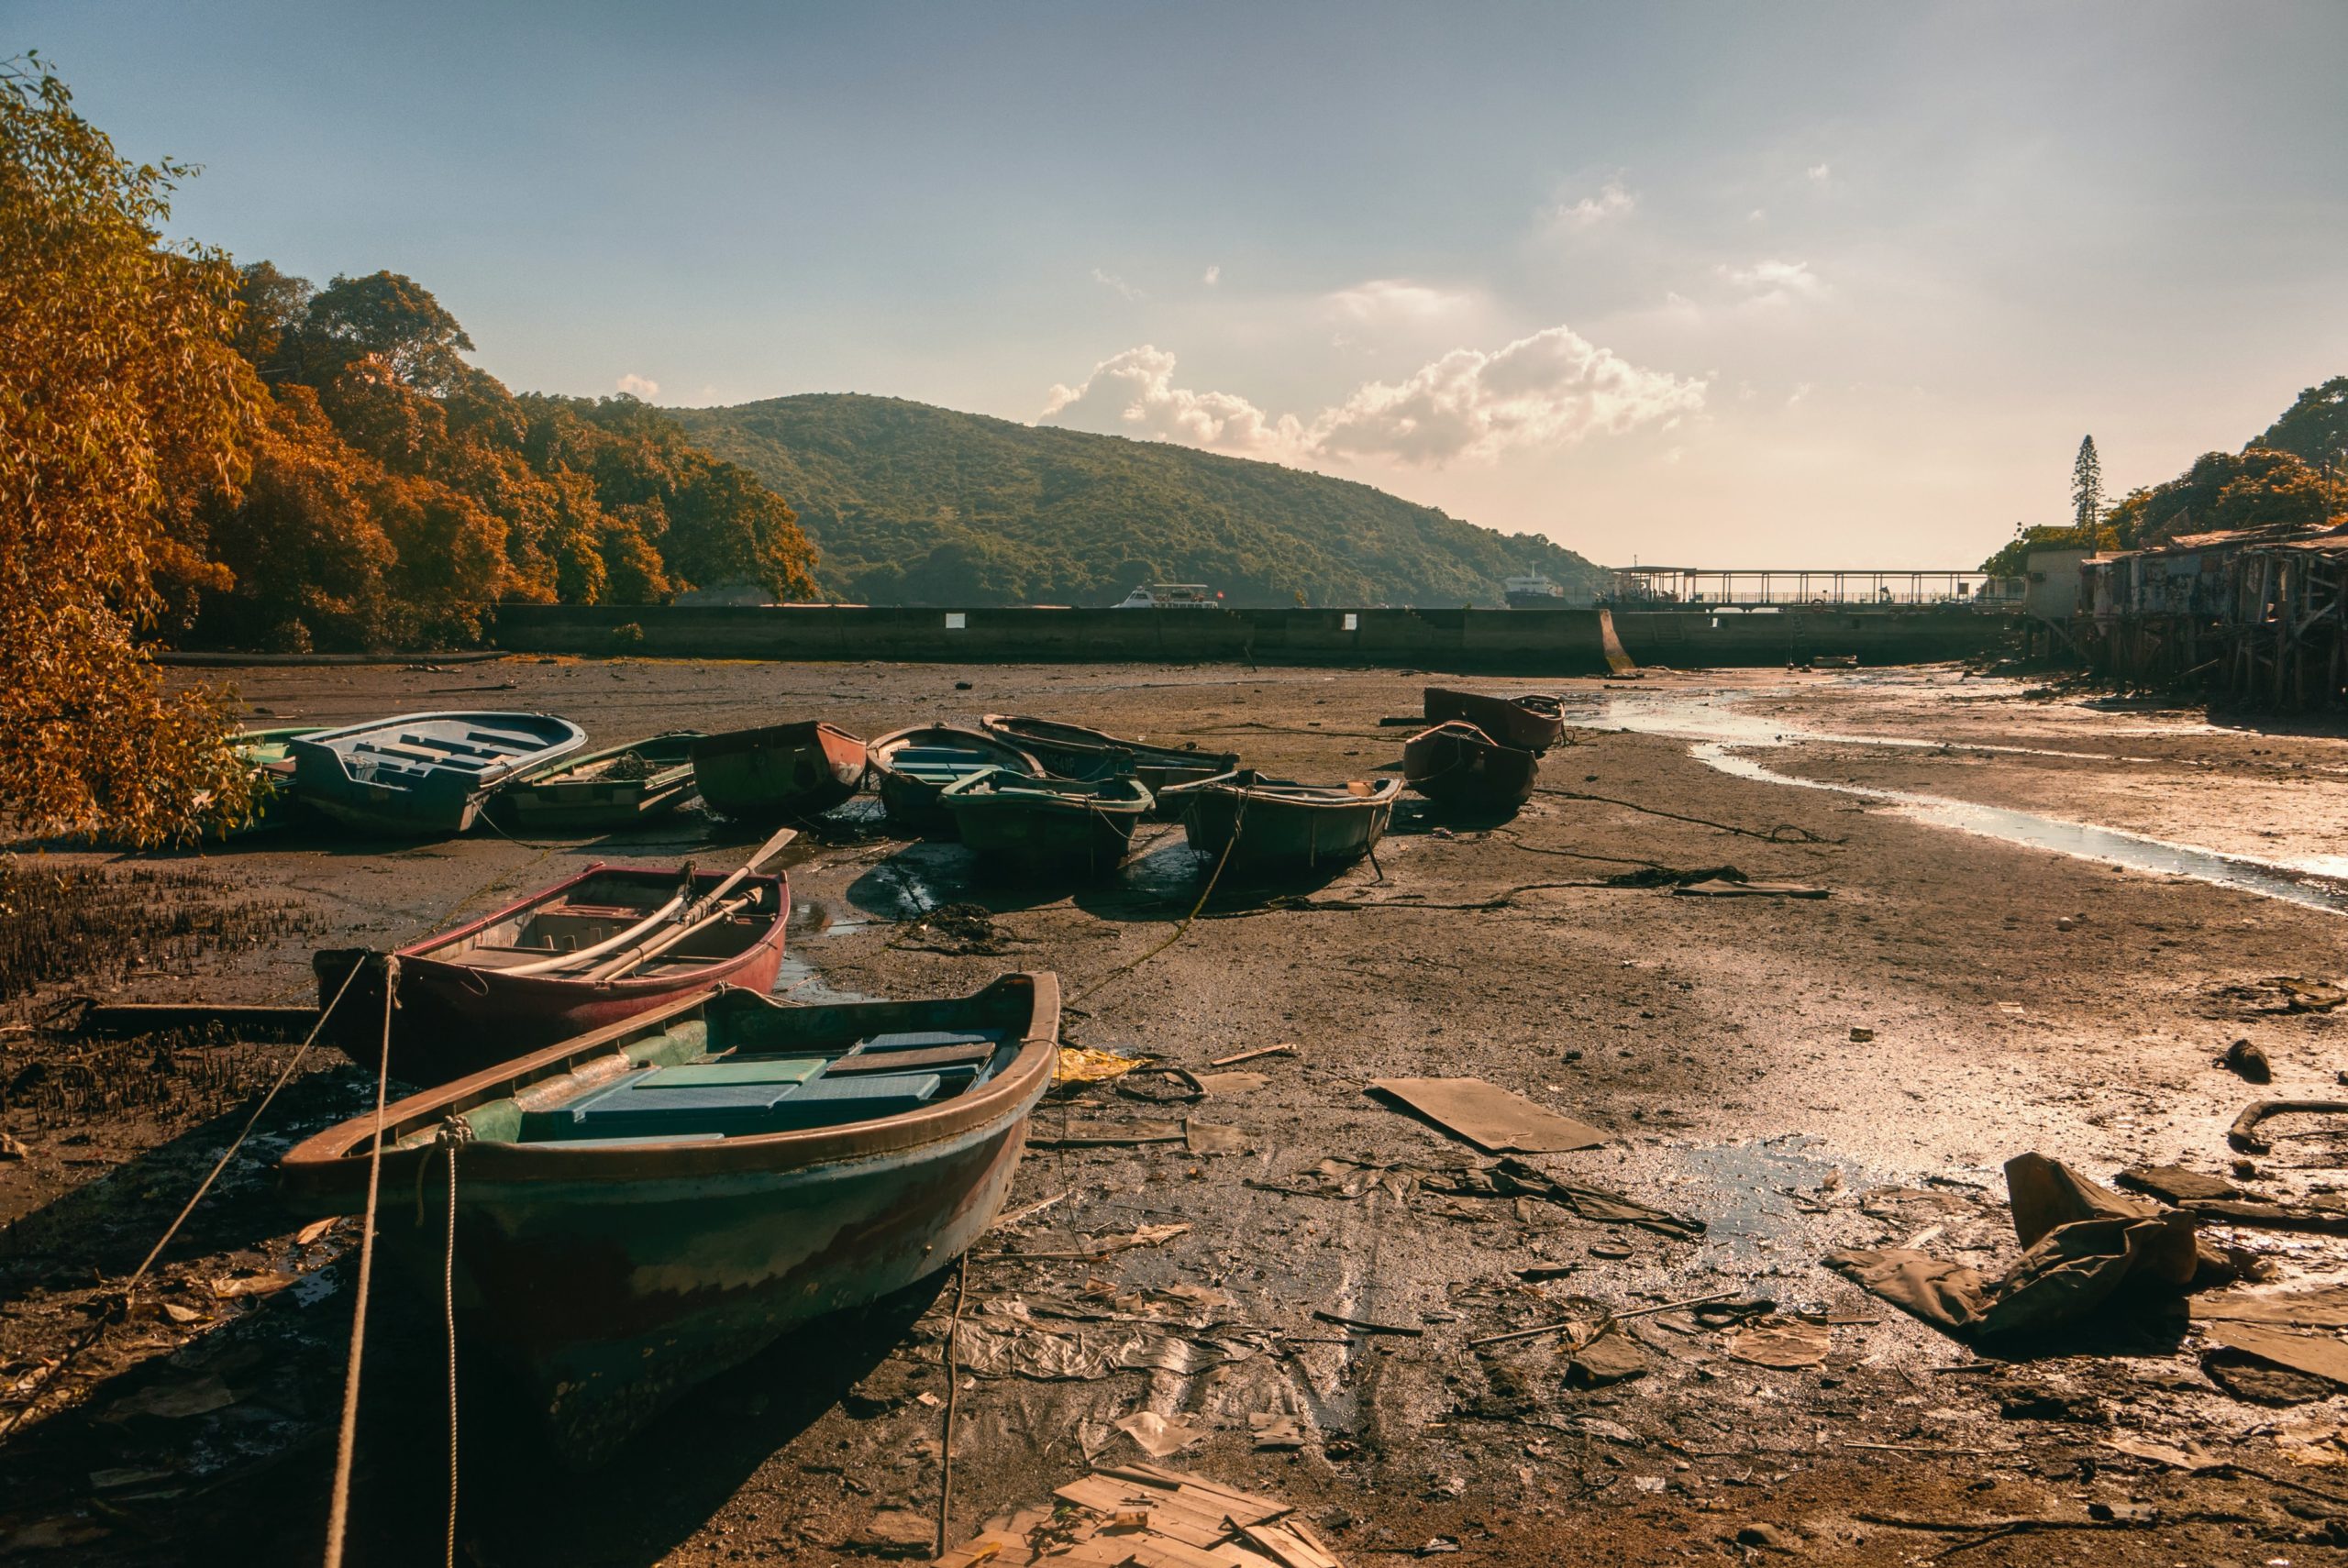 Boats on a dry river.